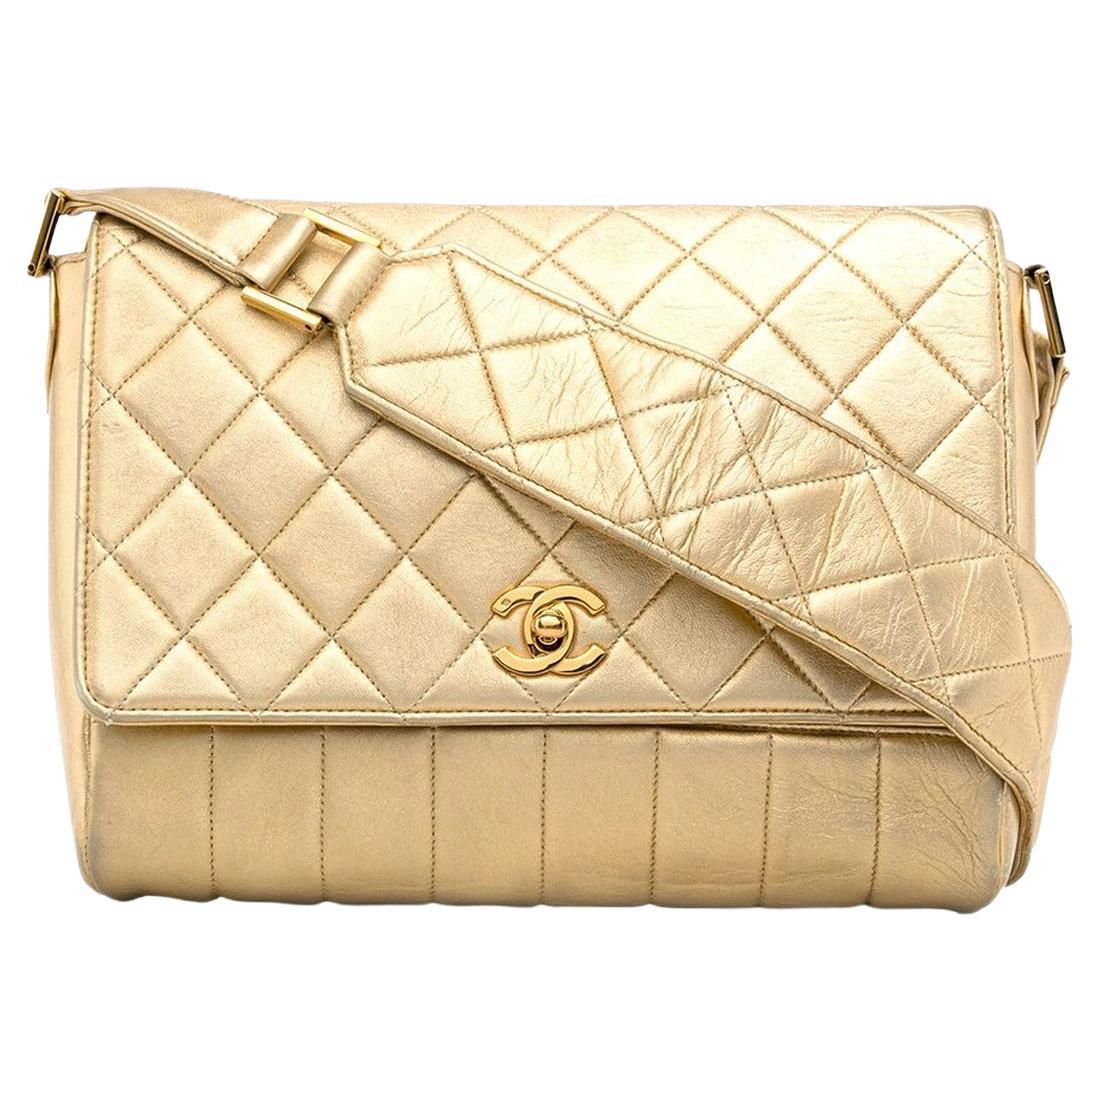 CHANEL, Bags, Chanel Quilted Mini Gold Classic Flap Pouch Chain Bag  111c28